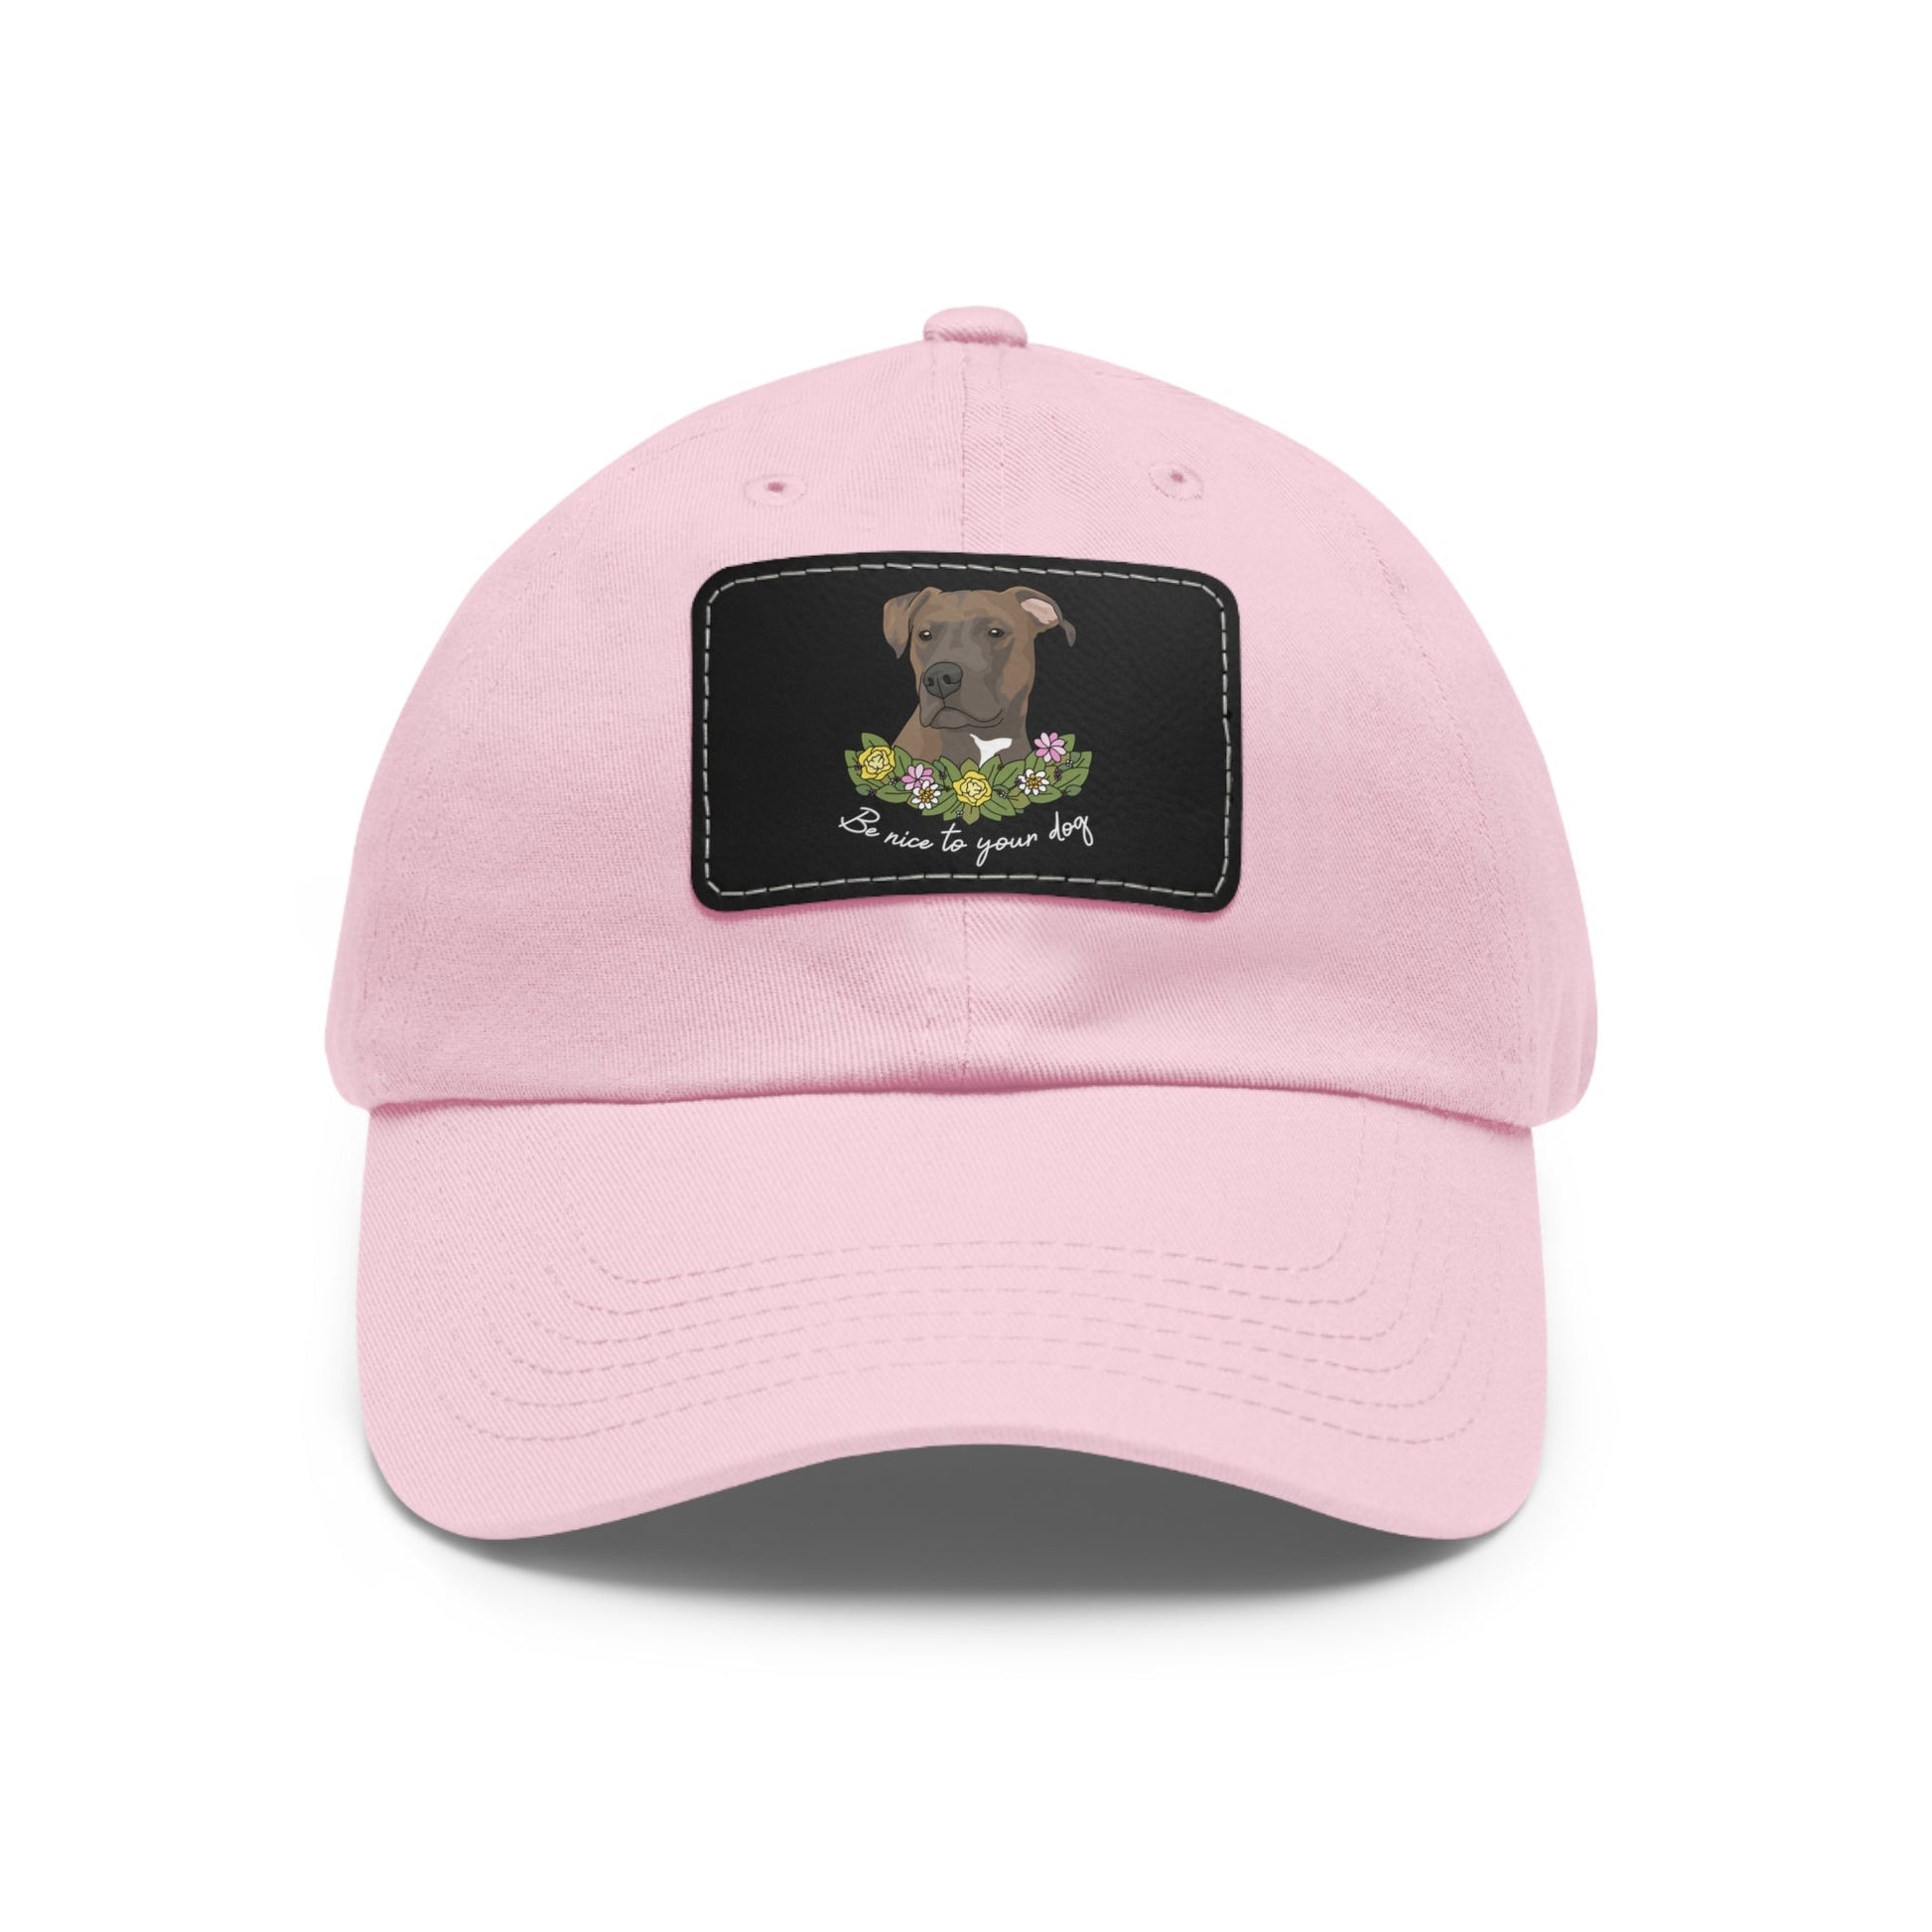 Be Nice to Your Dog | Dad Hat - Detezi Designs-15624331727182528844